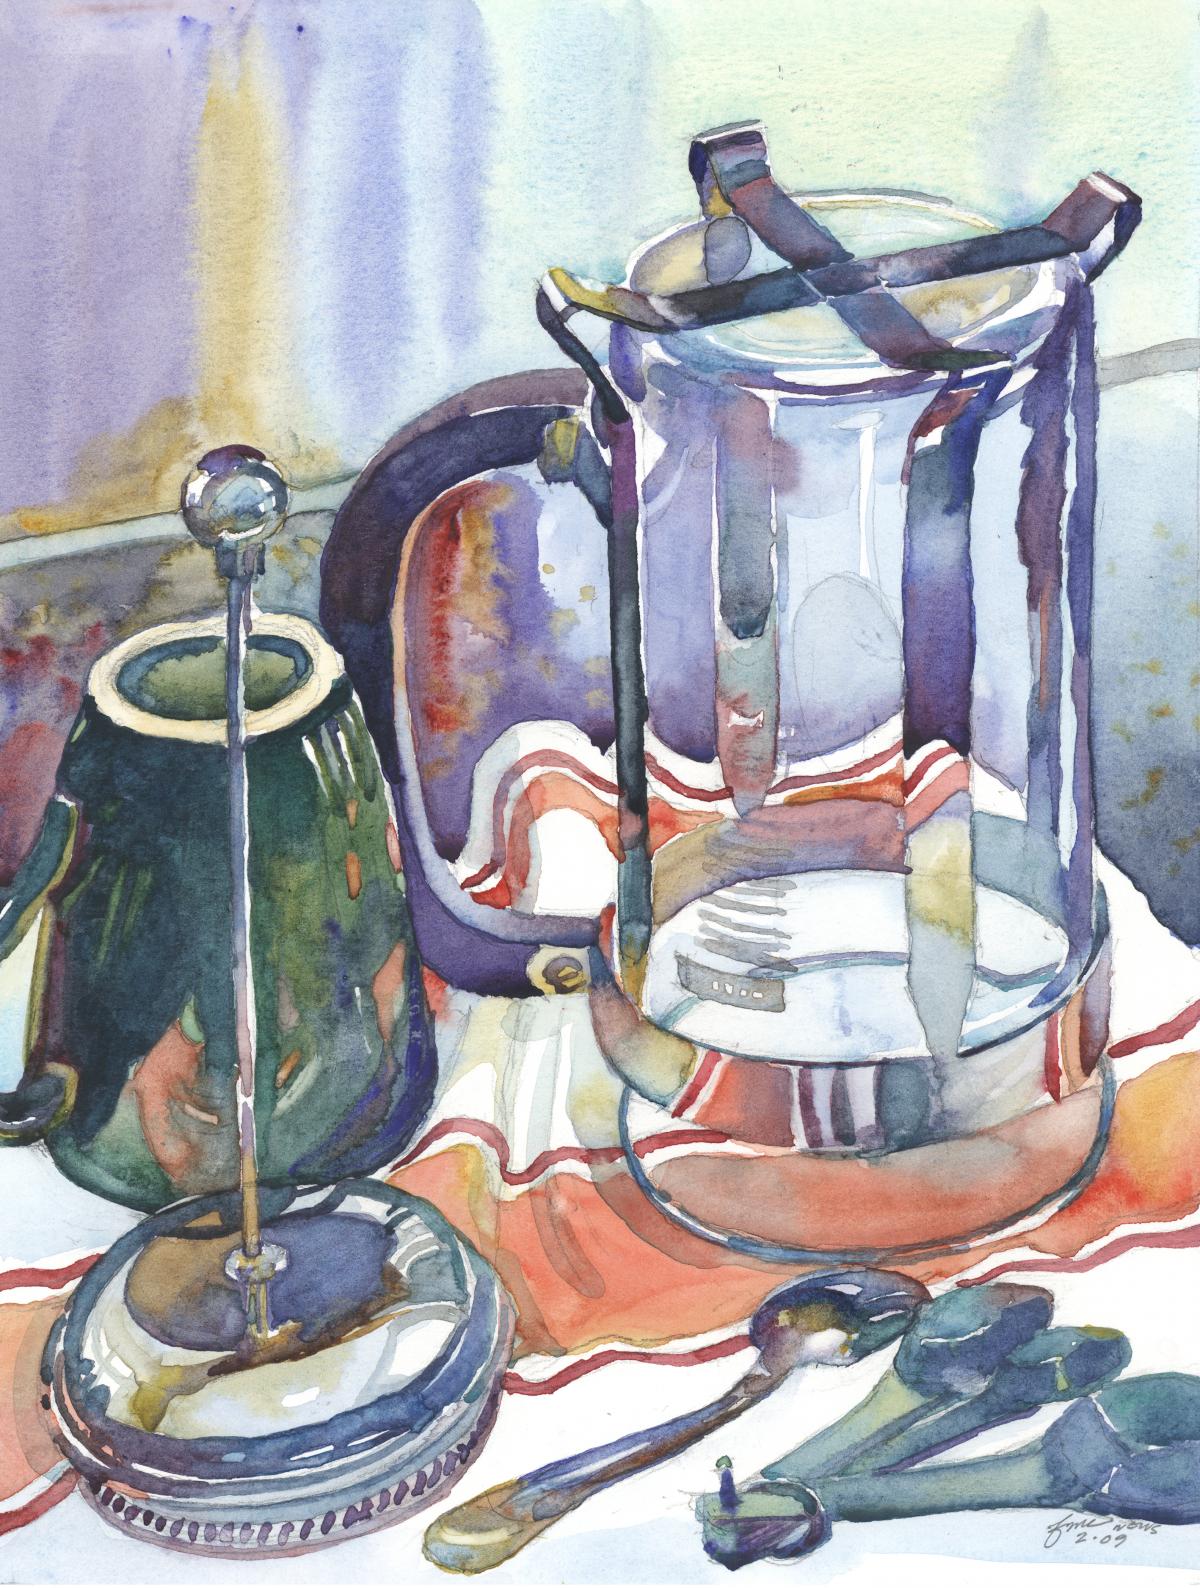 Post-Caffeinated - watercolor still life painting by Frank Costantino